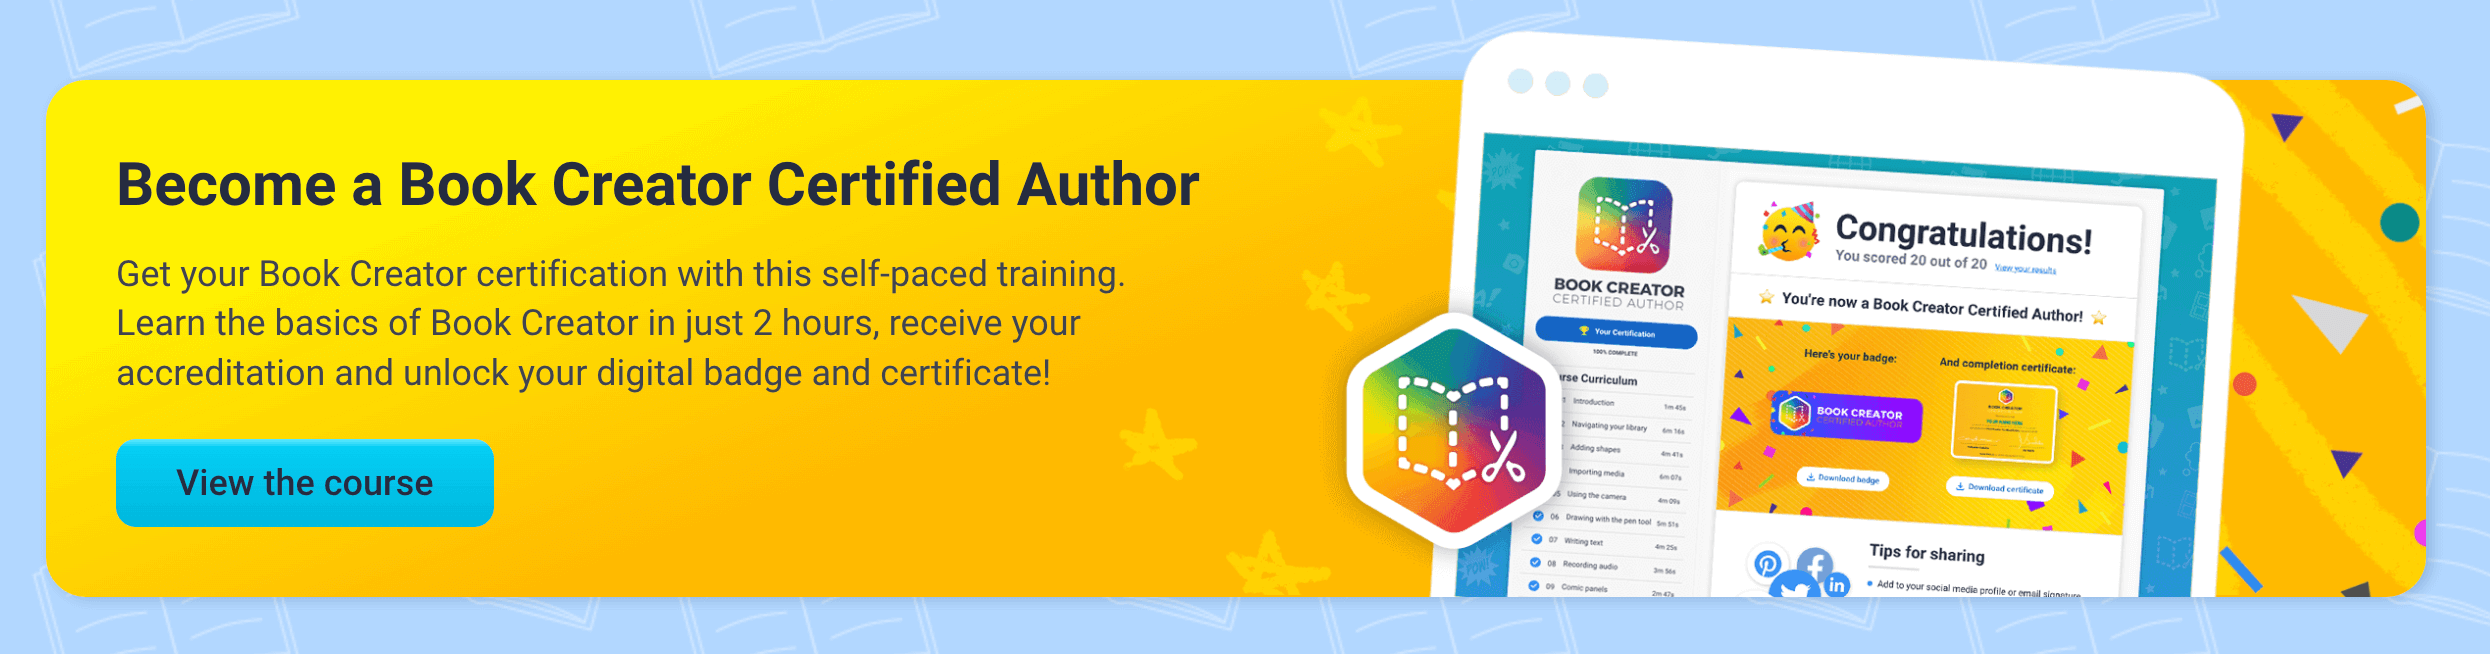 Book Creator Certified Authors - View the course